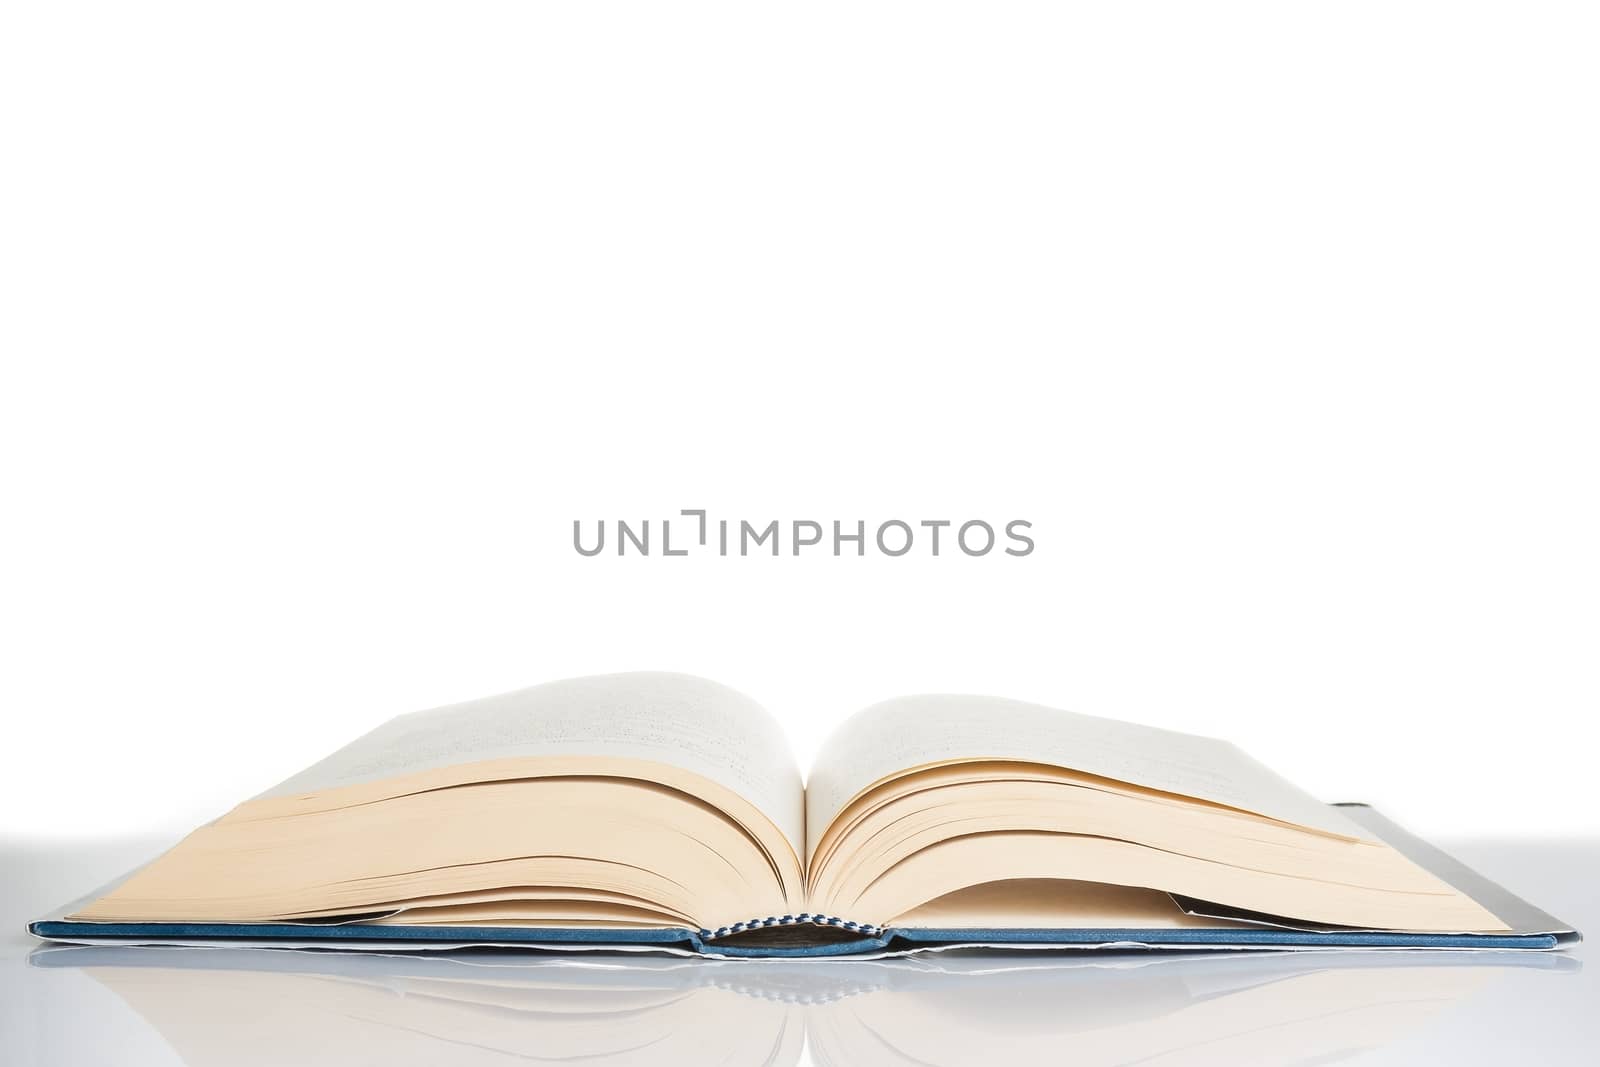 book isolated on table and white background with space for text, culture concept